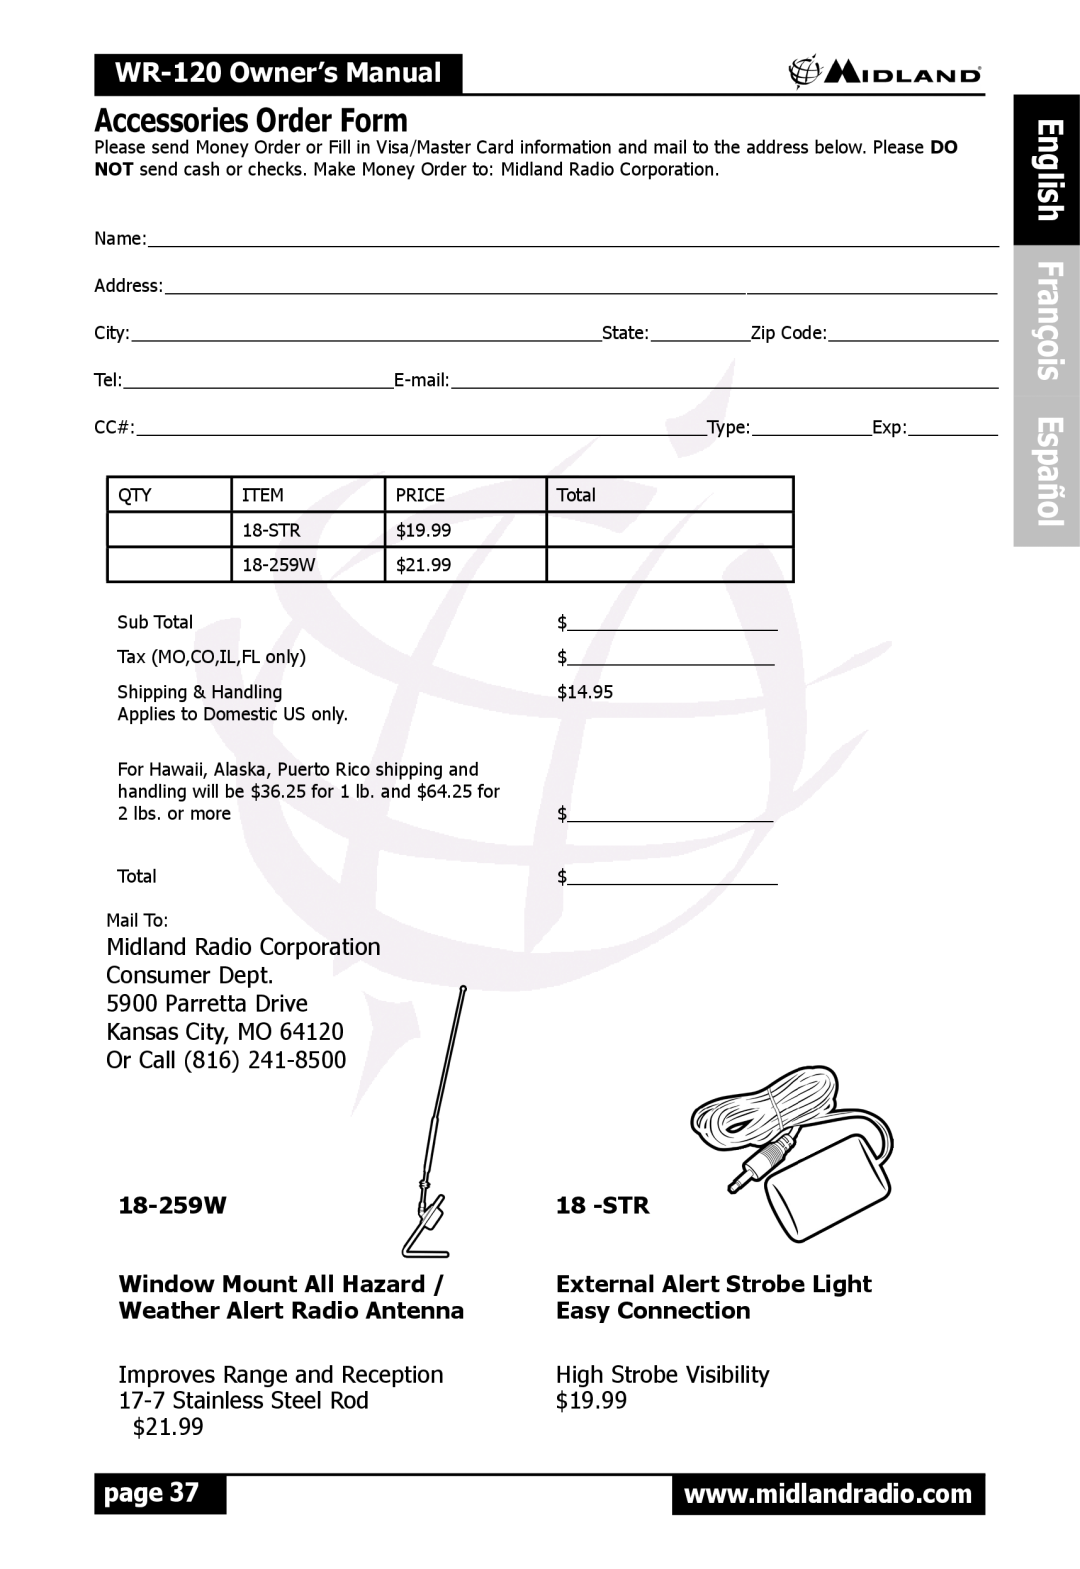 Midland Radio WR120 owner manual Accessories Order Form, English François Español, WR-120Owner’s Manual, page 